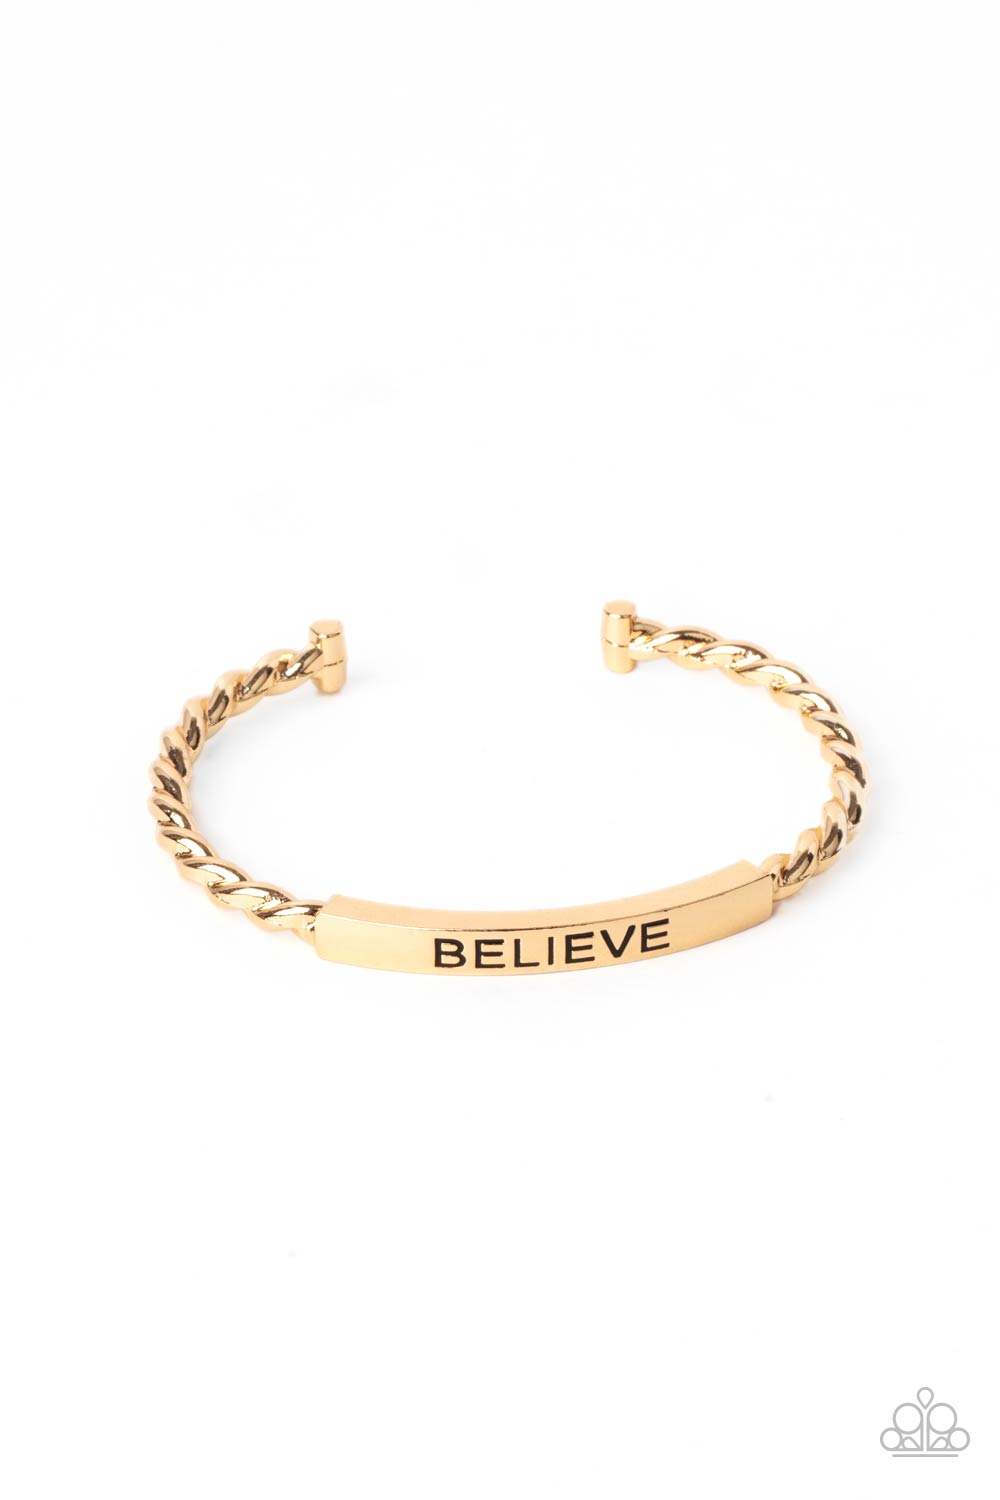 Paparazzi Keep Calm and Believe - Gold Bracelet - A Finishing Touch Jewelry